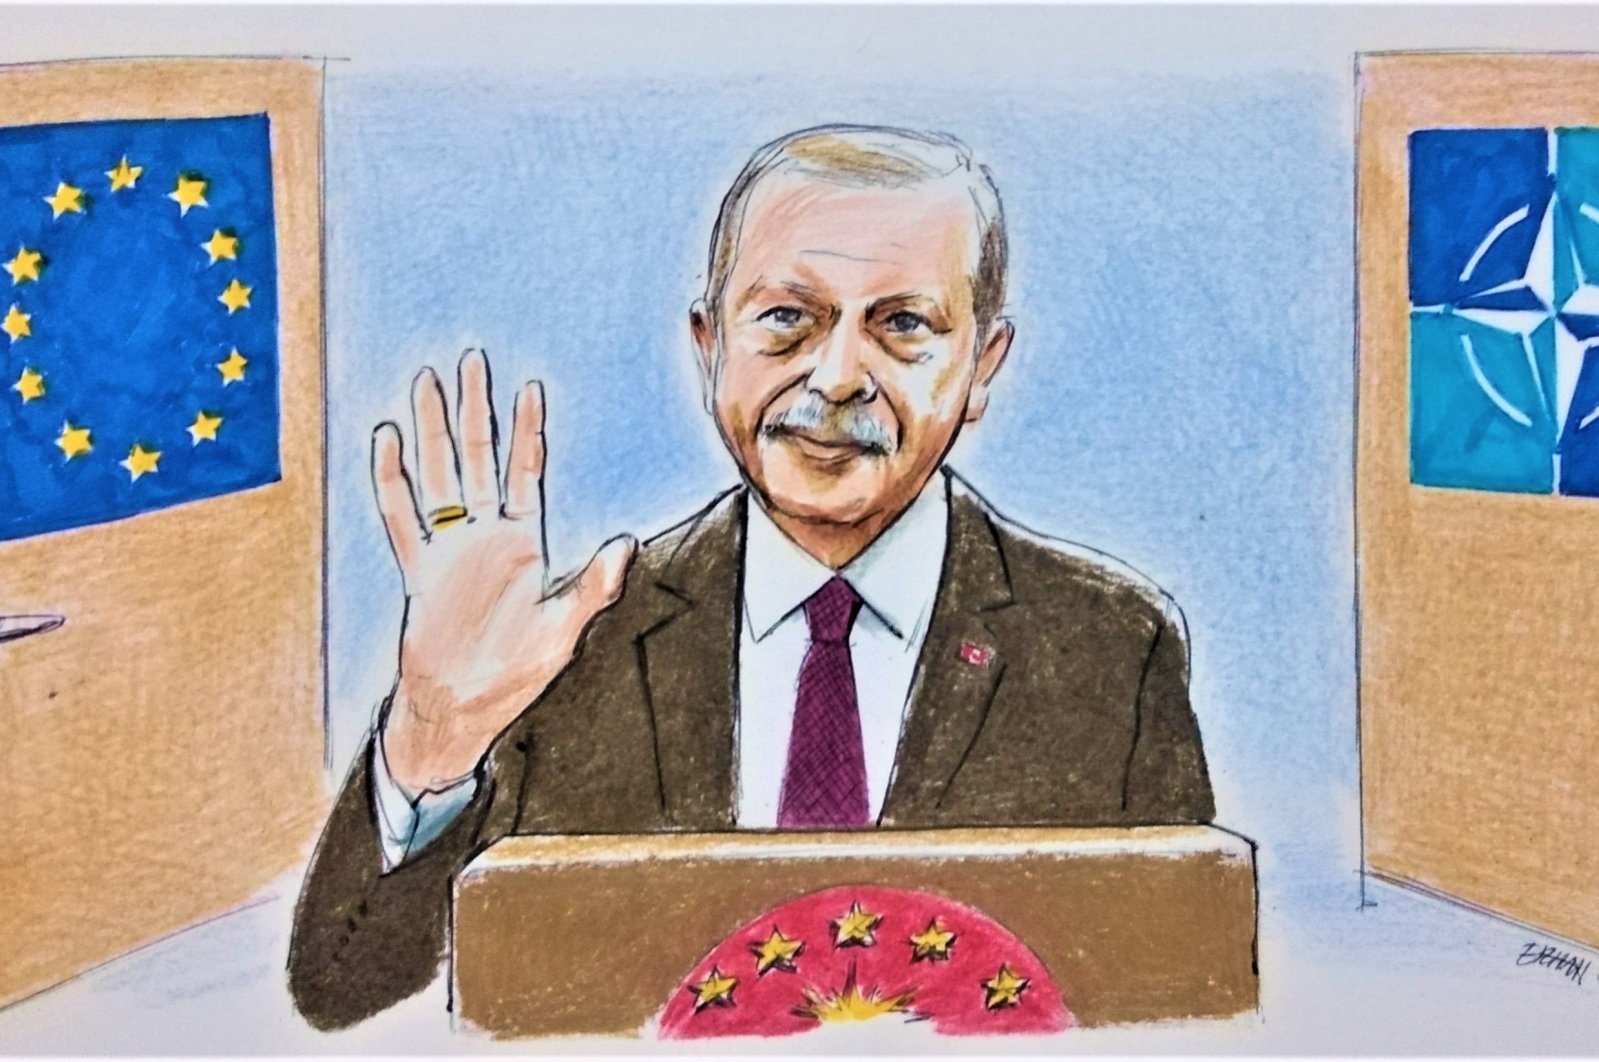 &quot;Reconsidering Türkiye’s role within the Western alliance on the basis of the spirit of alliance and geopolitical interests would generate strategic gains for the Turks as well as NATO and the EU.&quot; (Illustration by Erhan Yalvaç)